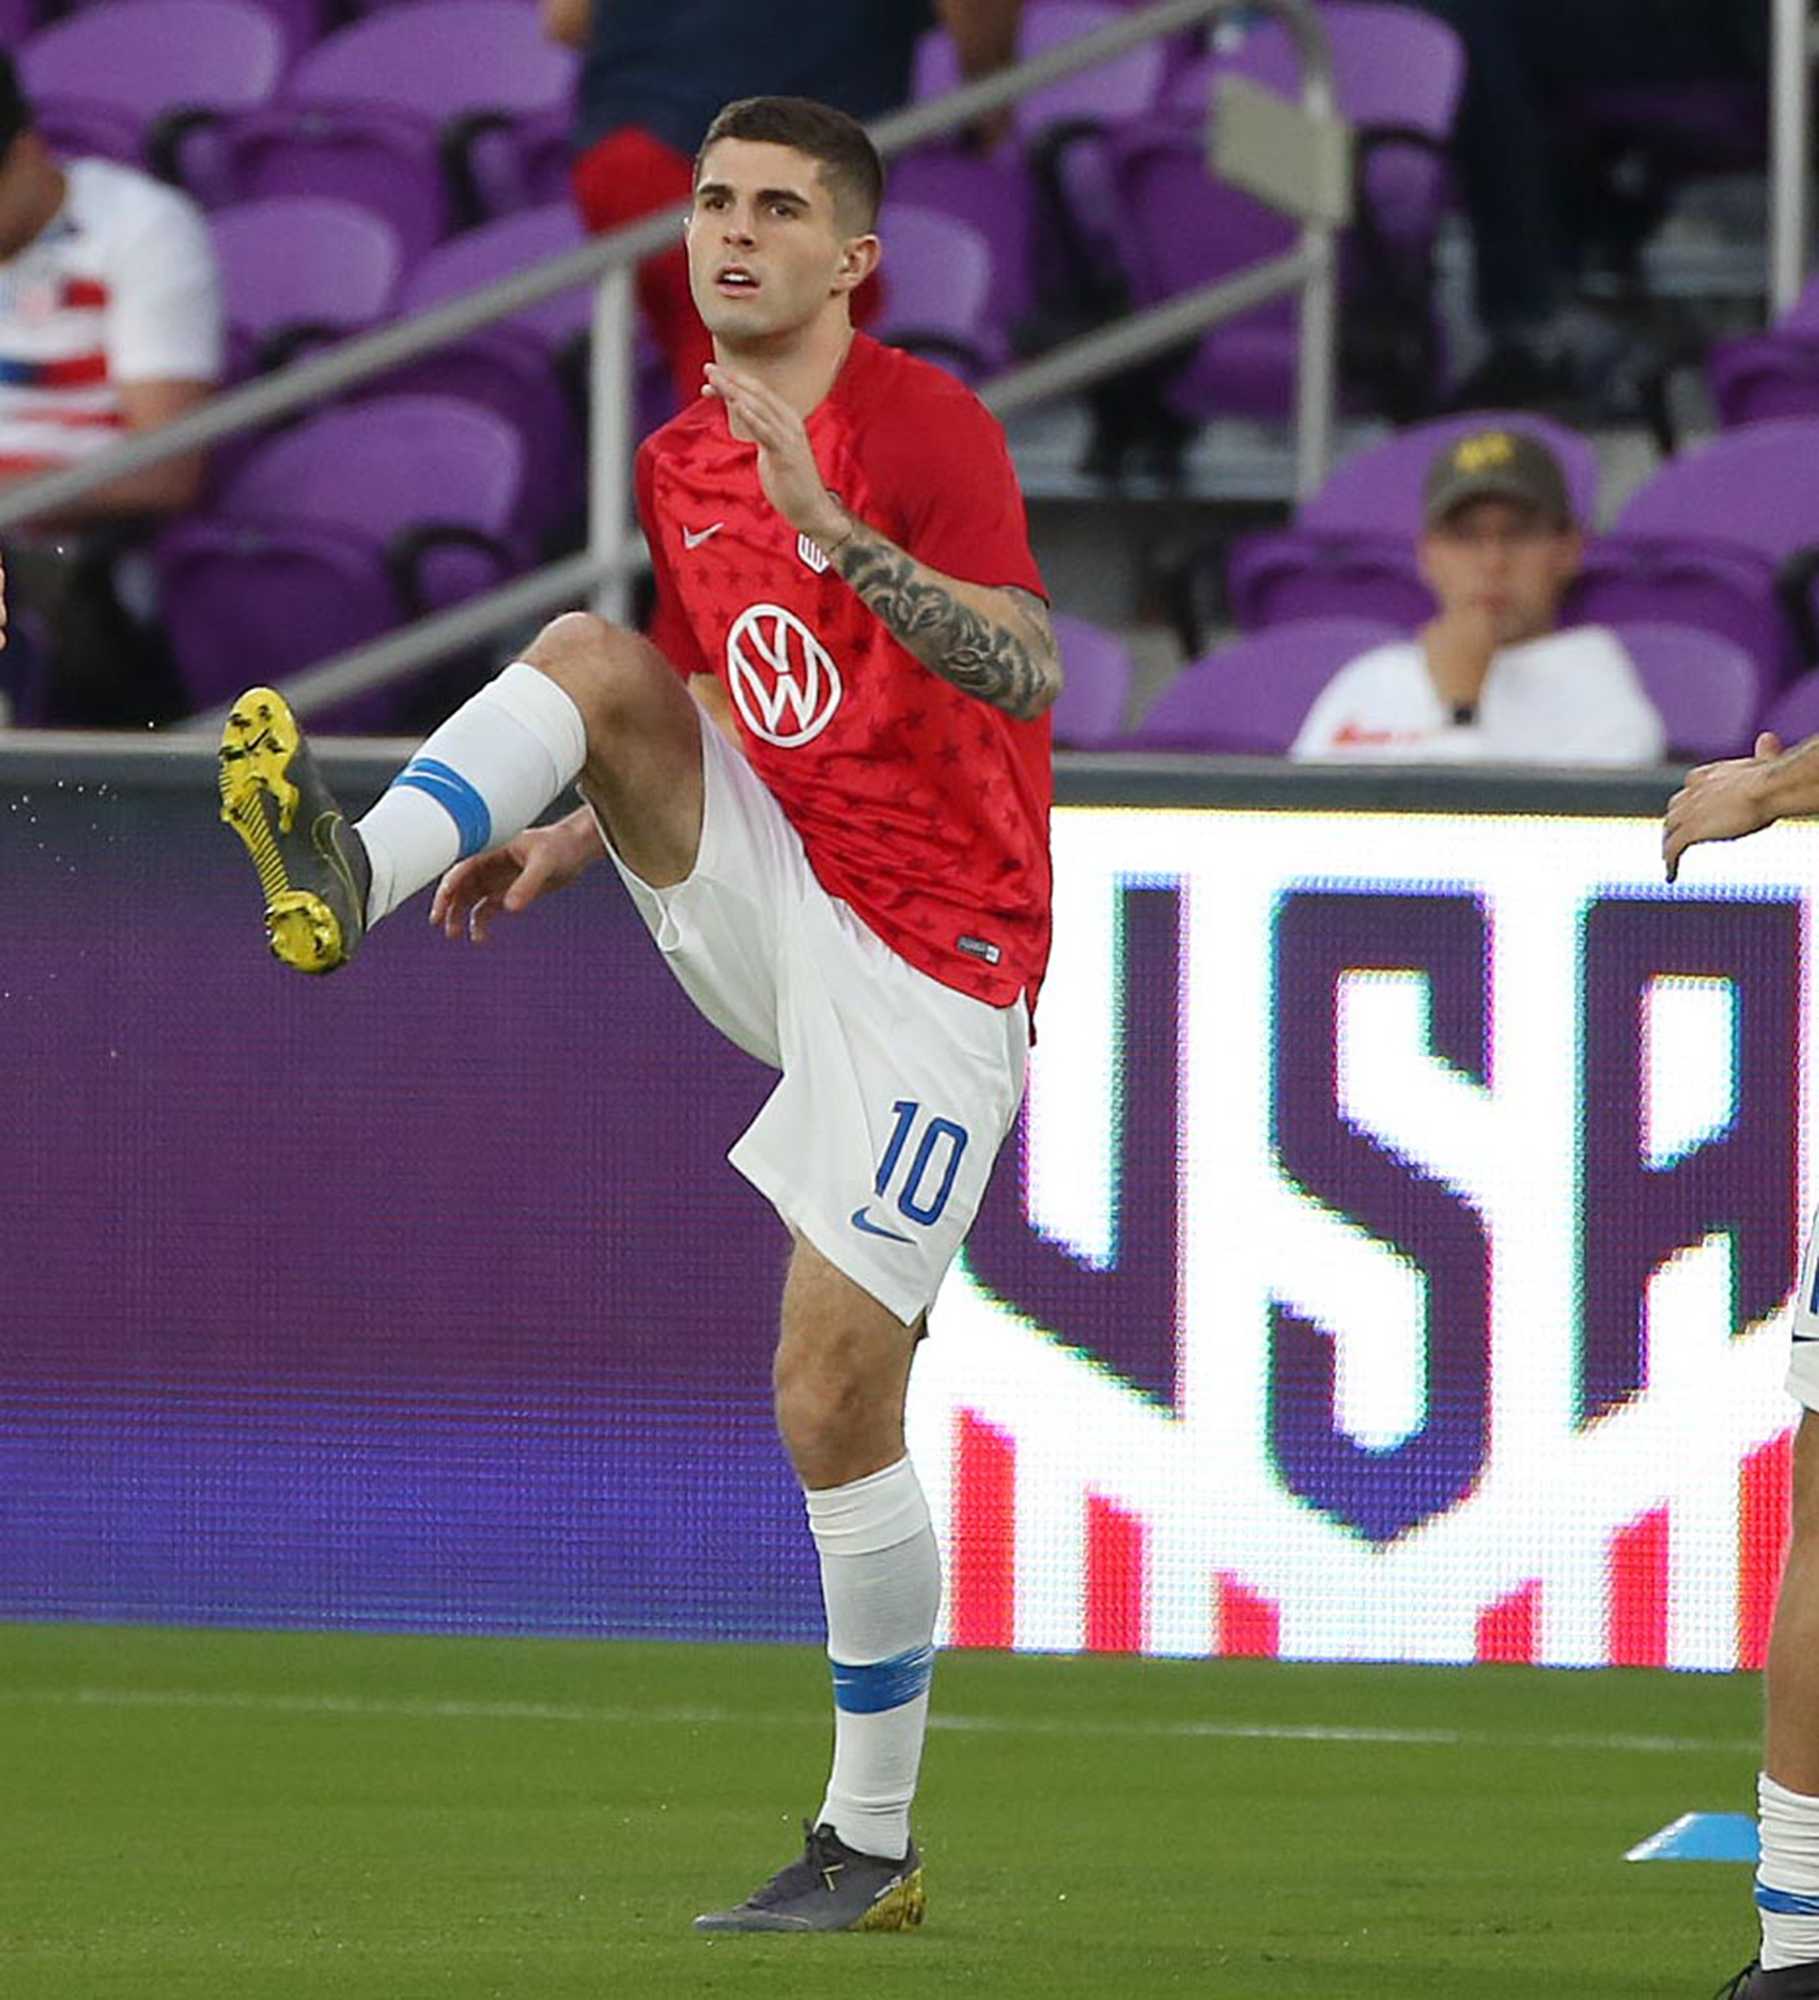 The USA mens national teams Christian Pulisic warms up before the start of a friendly against Ecuador at Orlando City Stadium on Thursday, March 21, 2019, in Orlando, Fla. (Stephen M. Dowell/Orlando Sentinel/TNS)